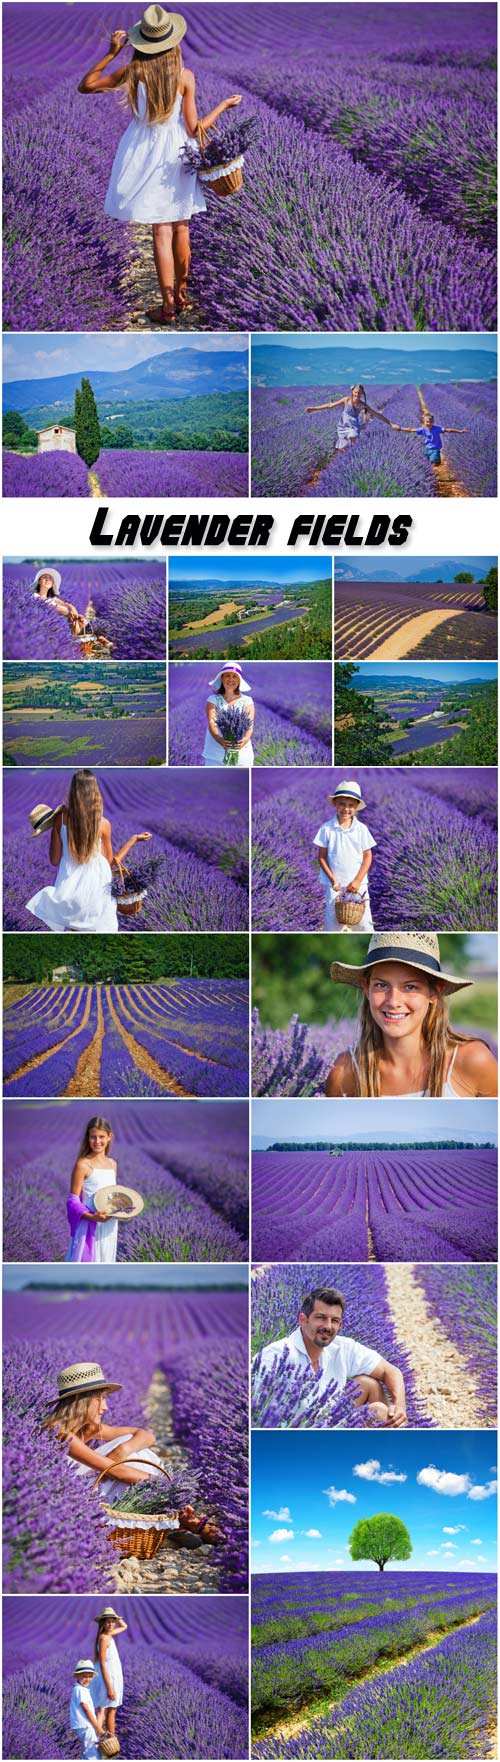 Lavender fields, people and nature